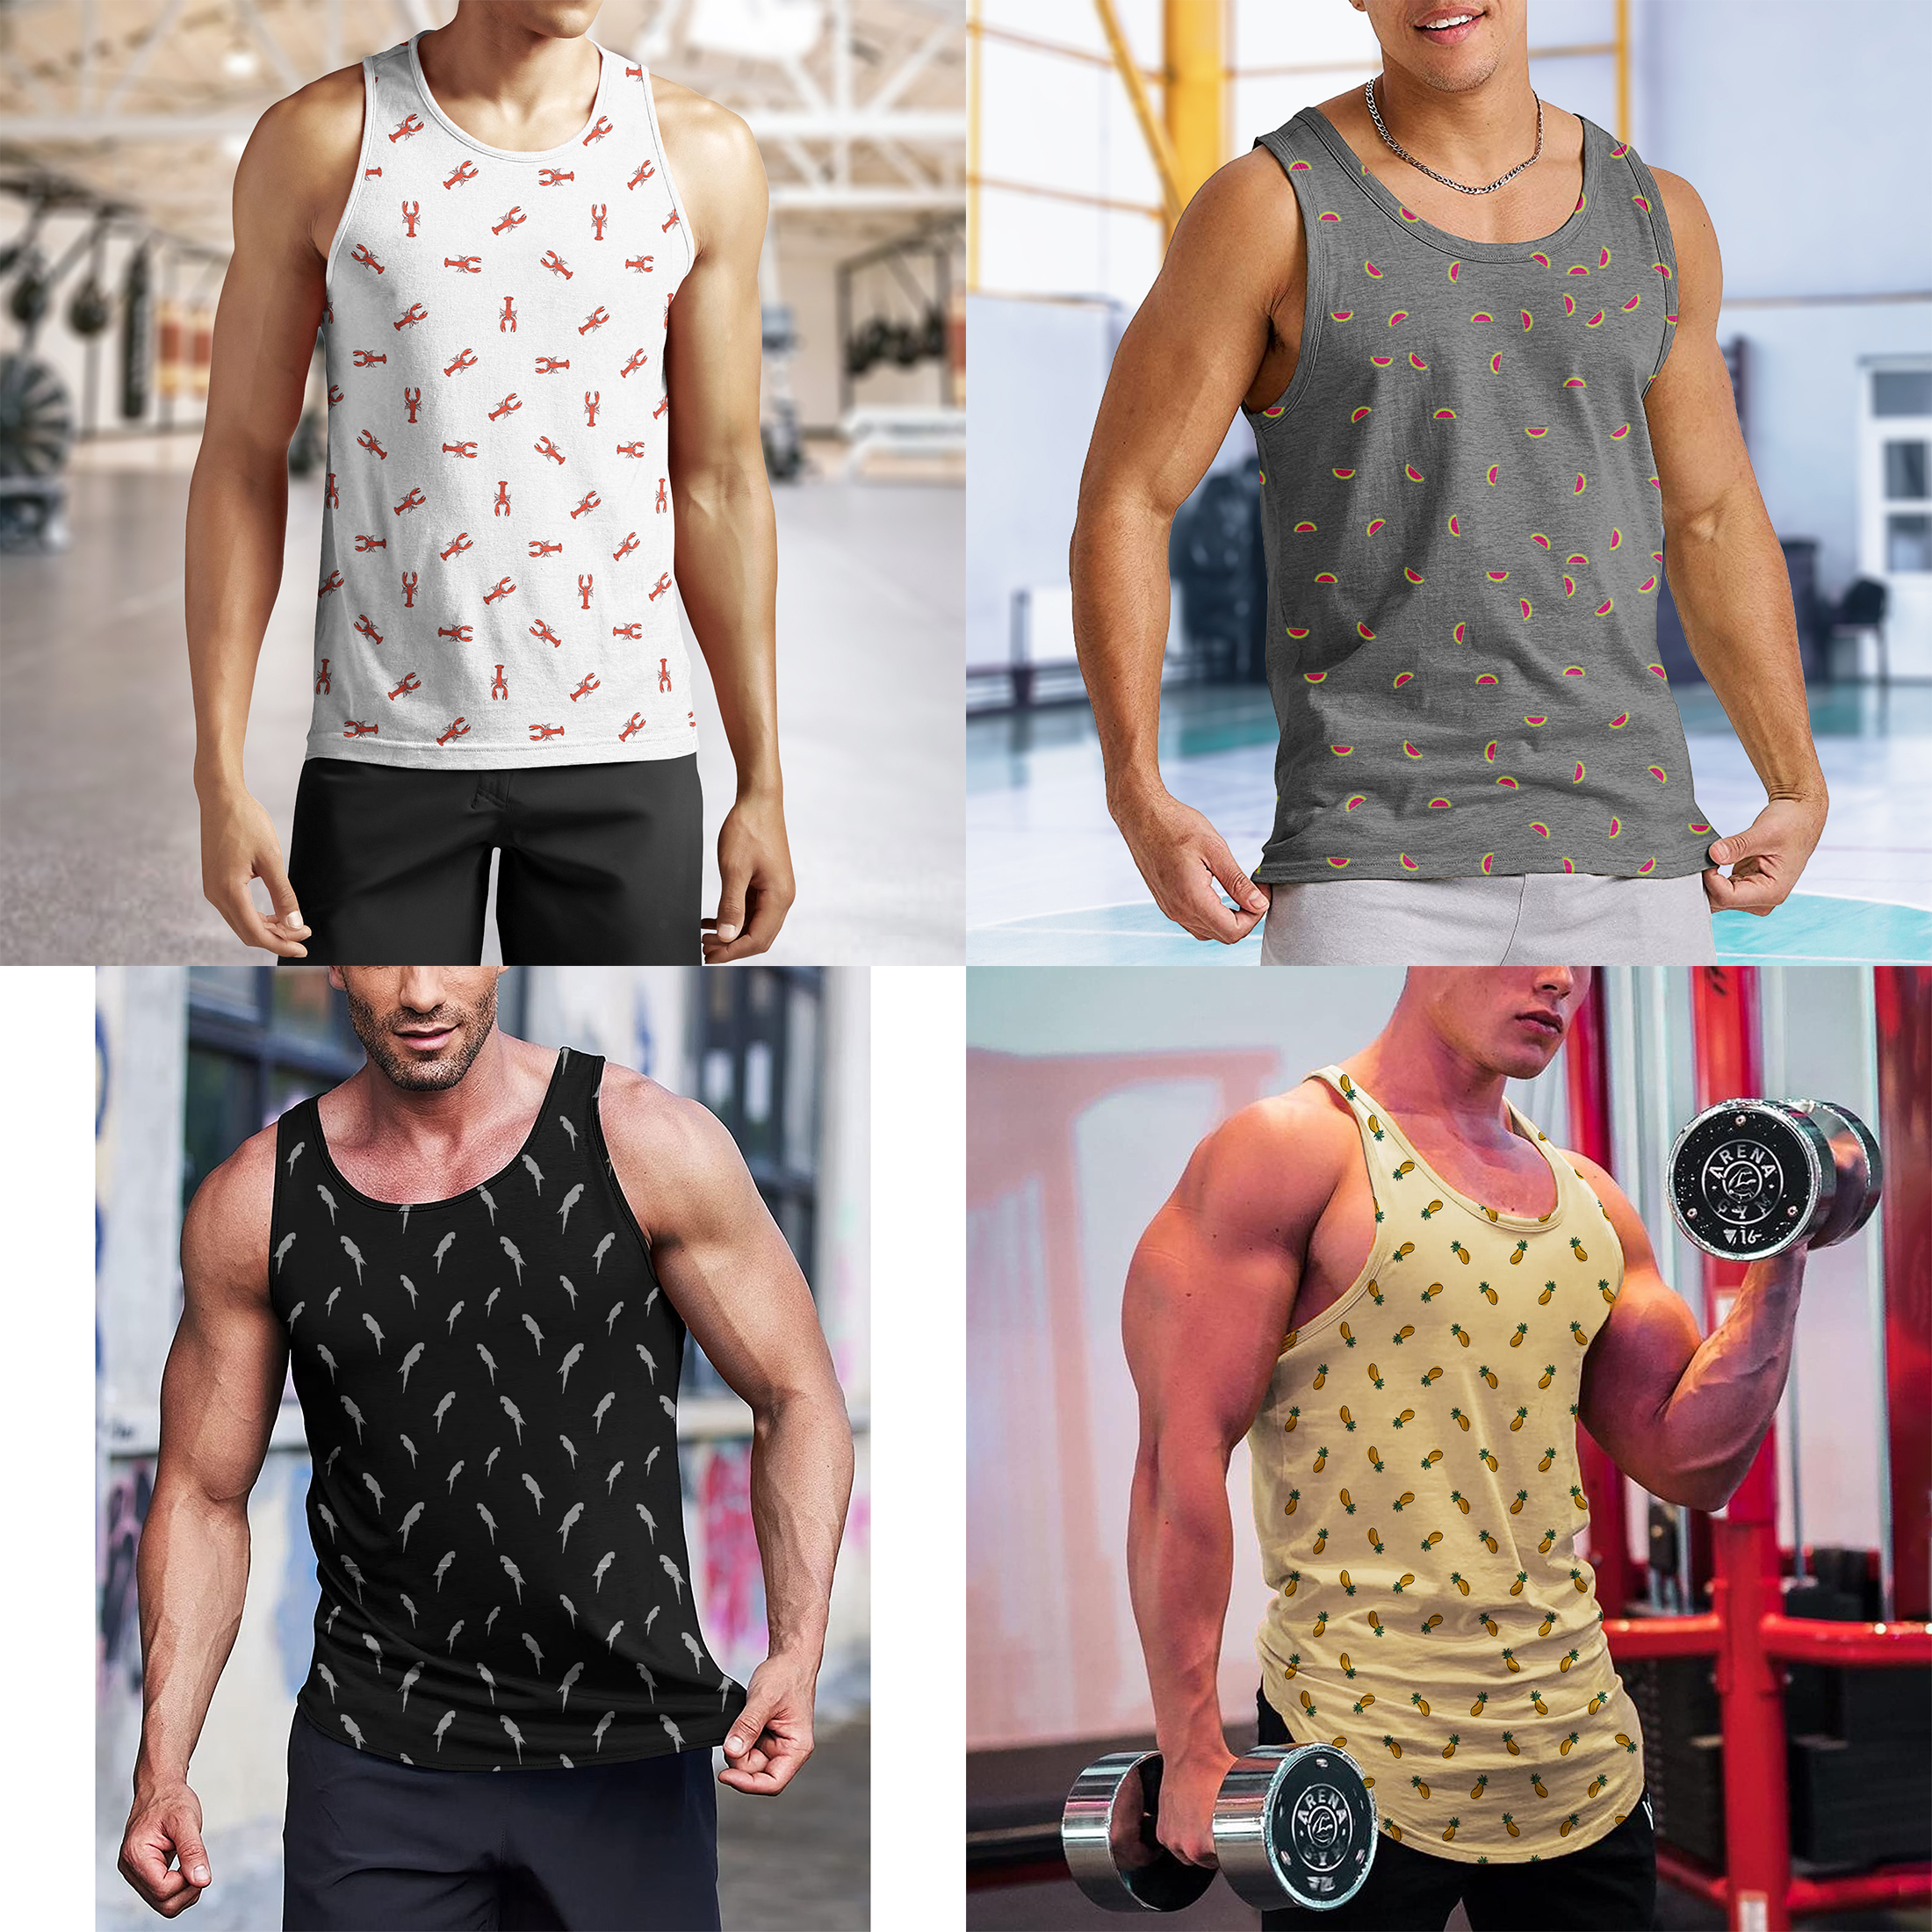 4-Pack Men's Muscle Tank Tops Active Athletic Crew Neck Moisture Wicking Quick Dry Breathable Sleeveless Fitness Shirts Gym Workout Tees - M